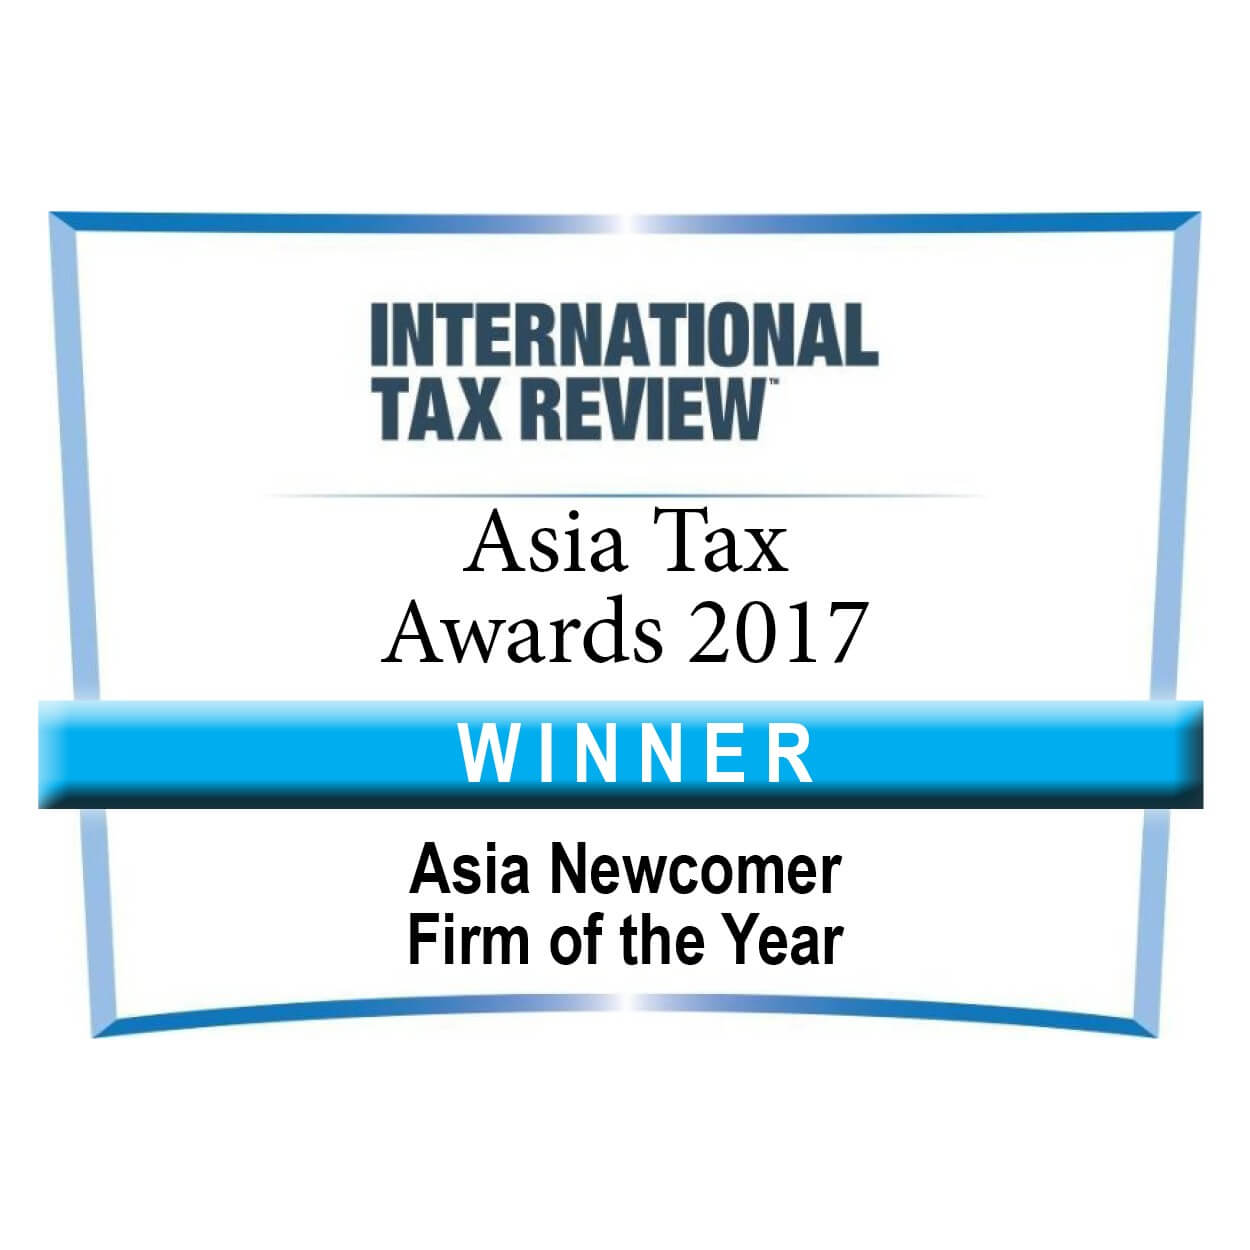 Asia TP Newcomer of the Year Asia Tax Awards Winner 2017